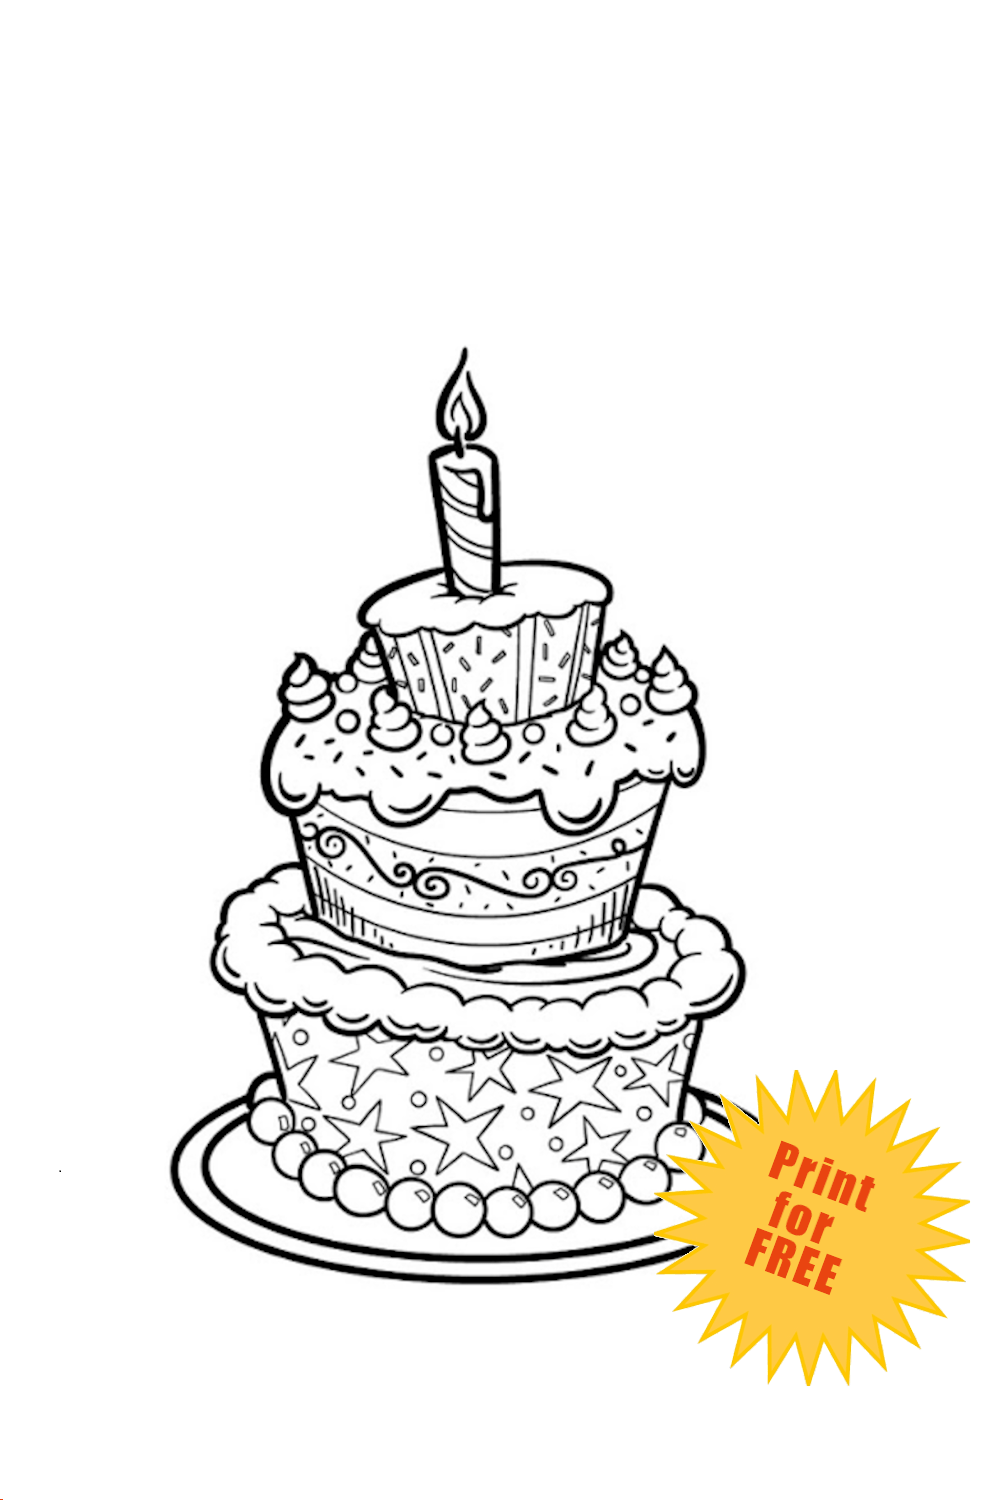 Very Cute Birthday Cake Coloring Page